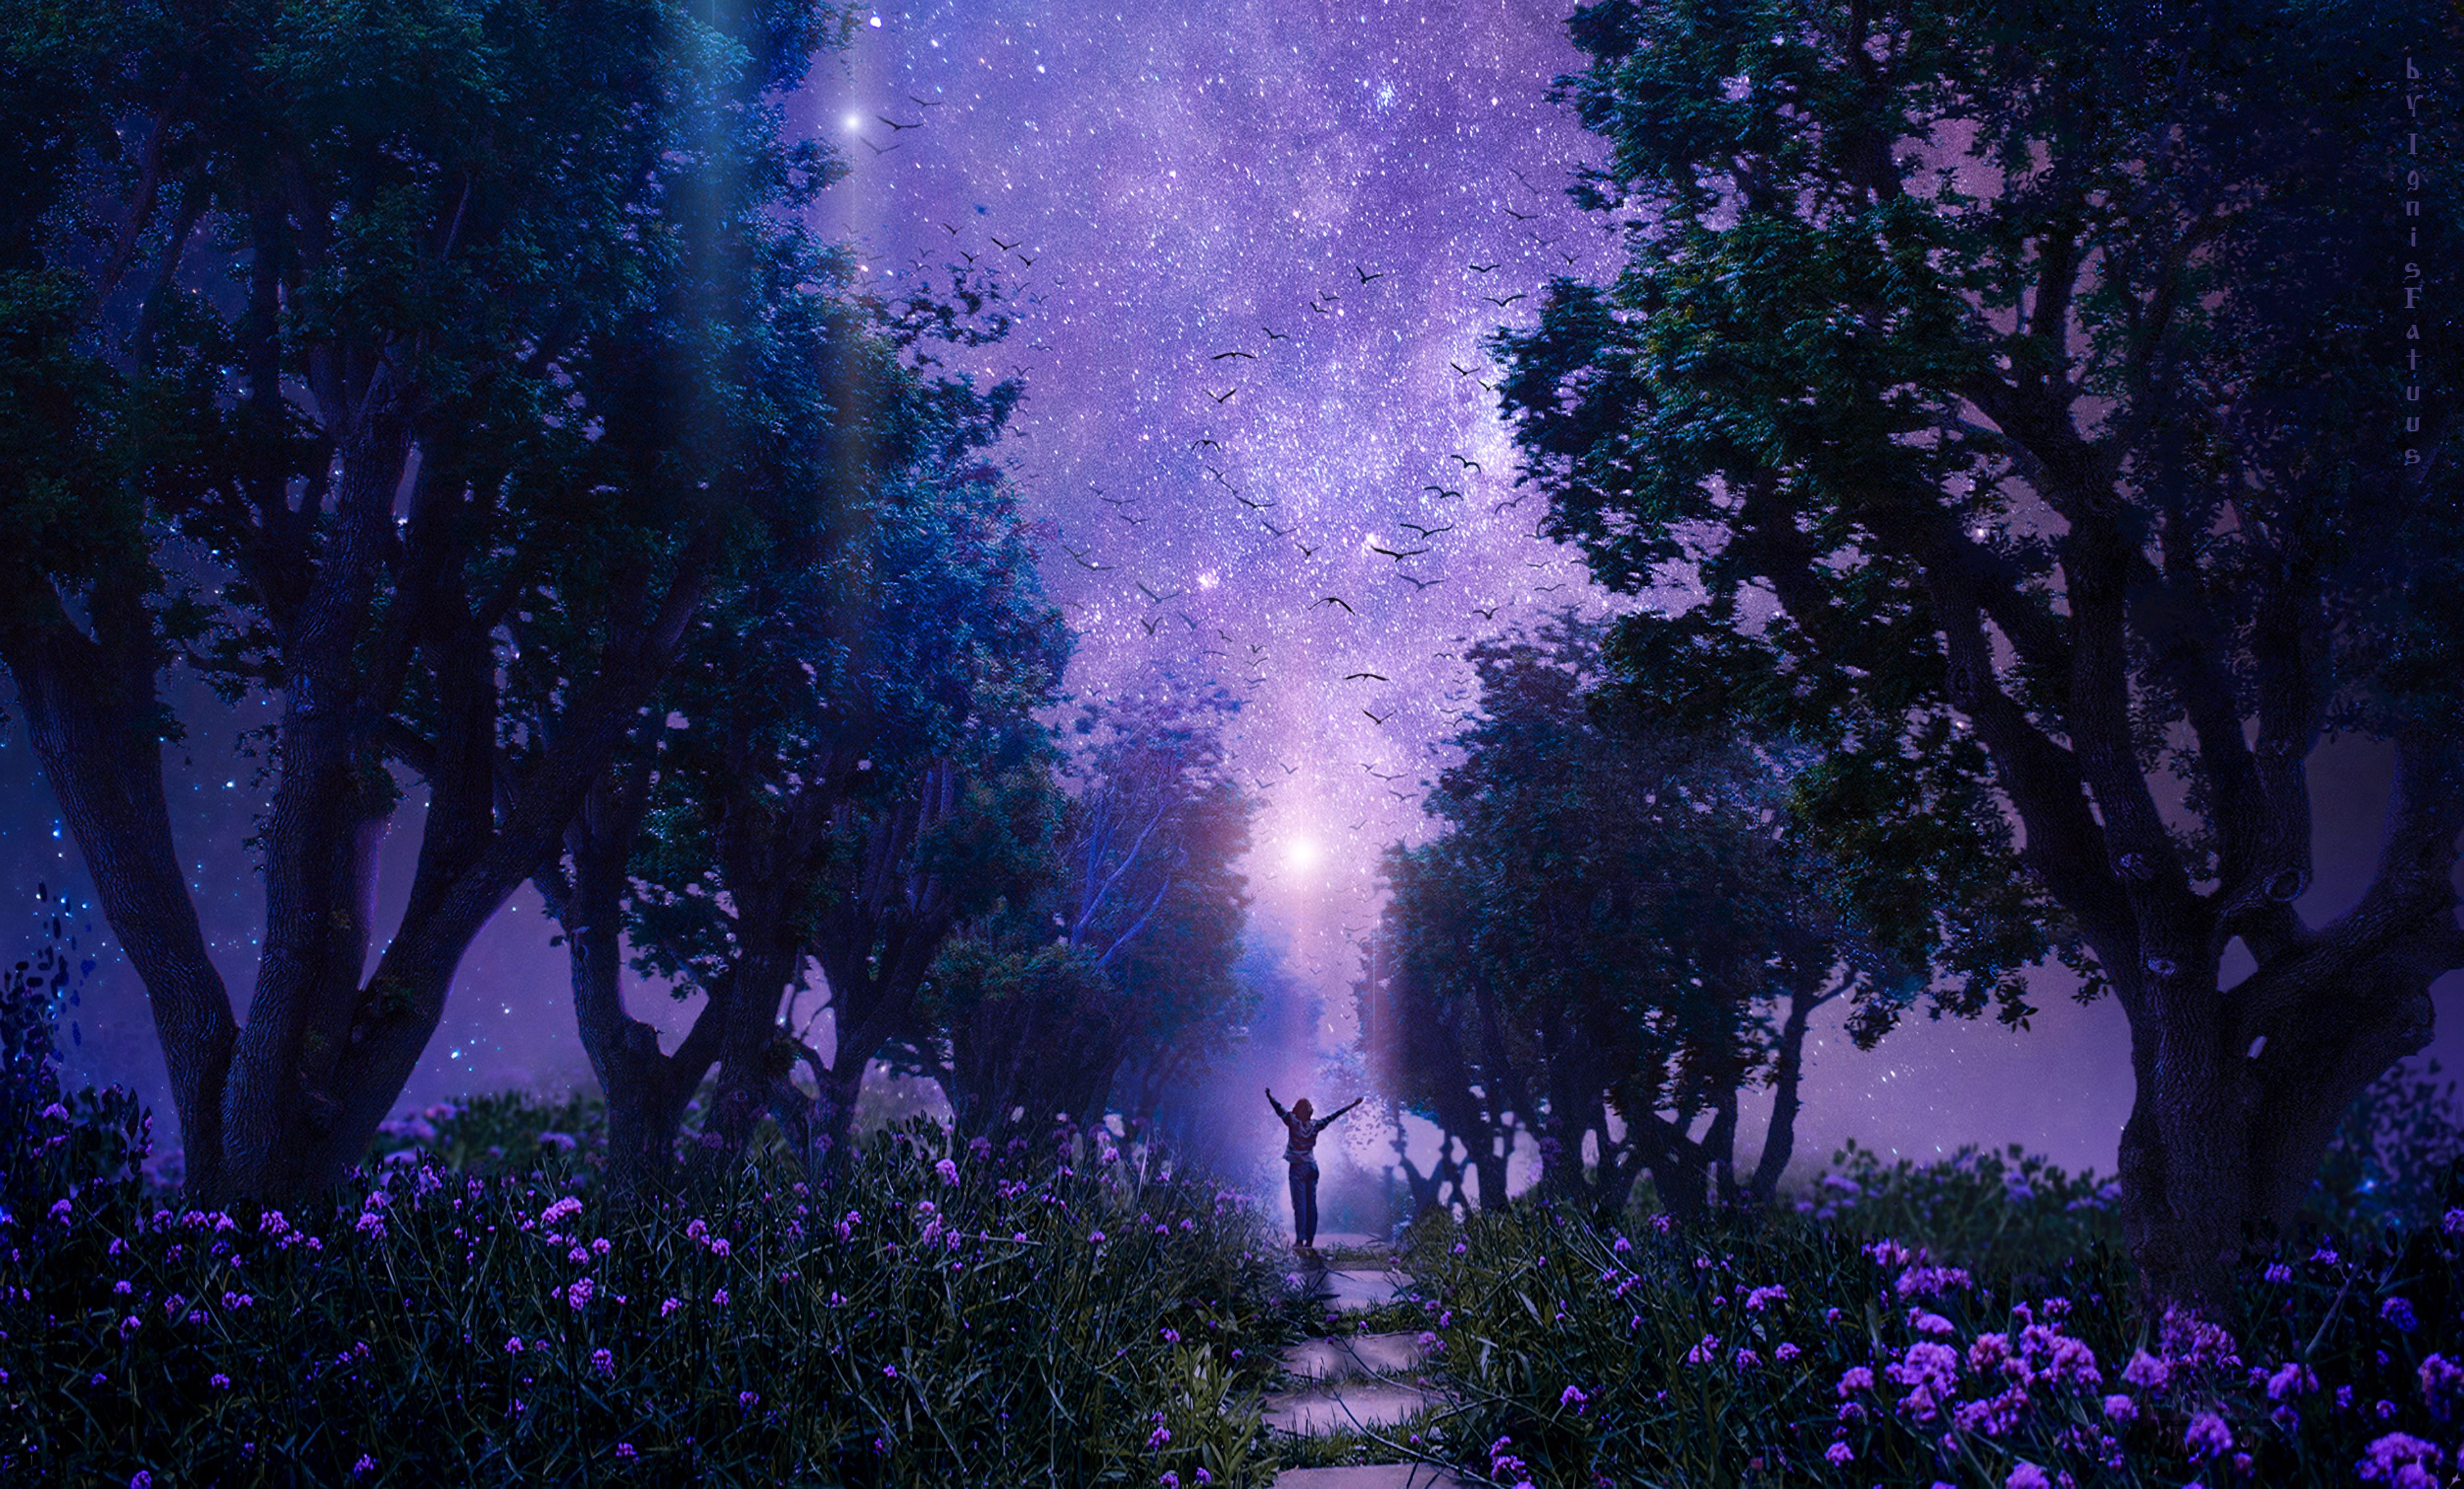 Mobile wallpaper: Fairy, Starry Sky, Fantasy, Fabulous, Forest, Violet, Art, Purple, 88992 download the picture for free